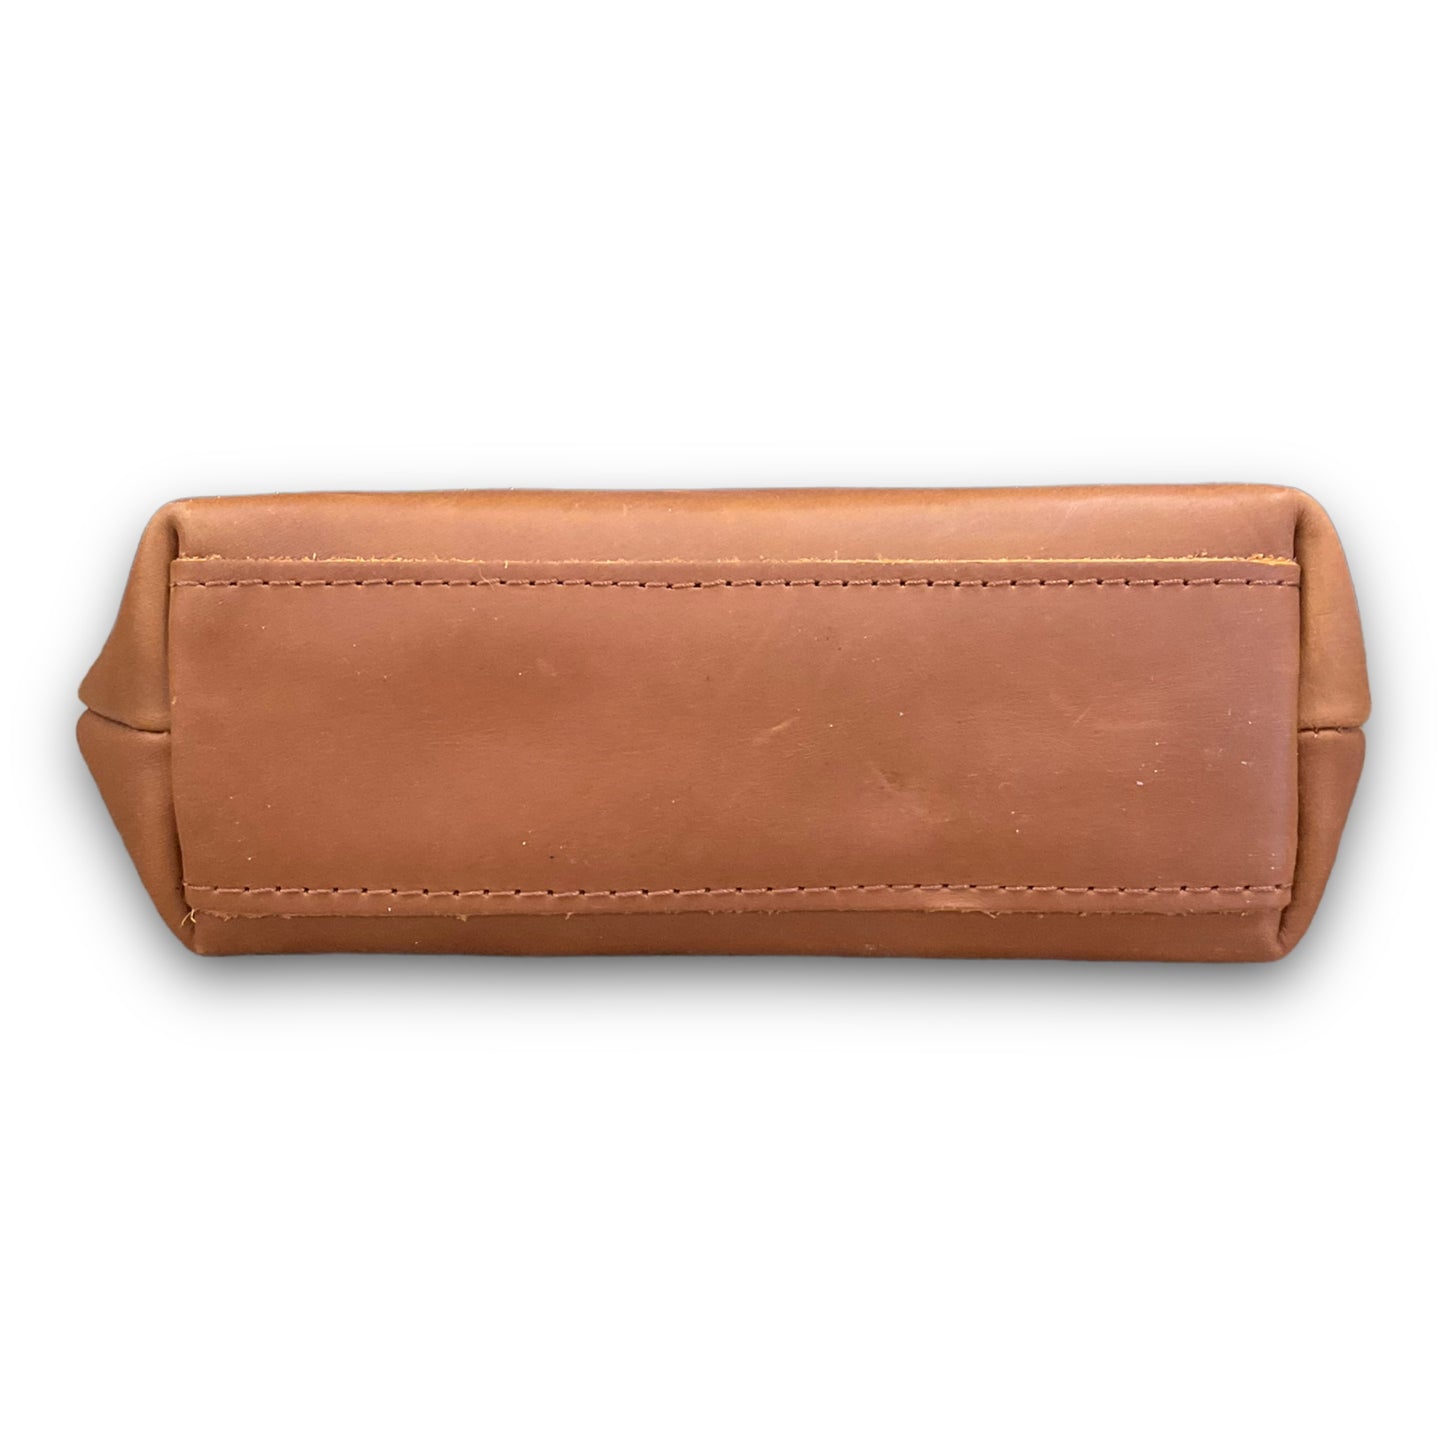 Makeup Bag Leather By Cmc  Size: Small